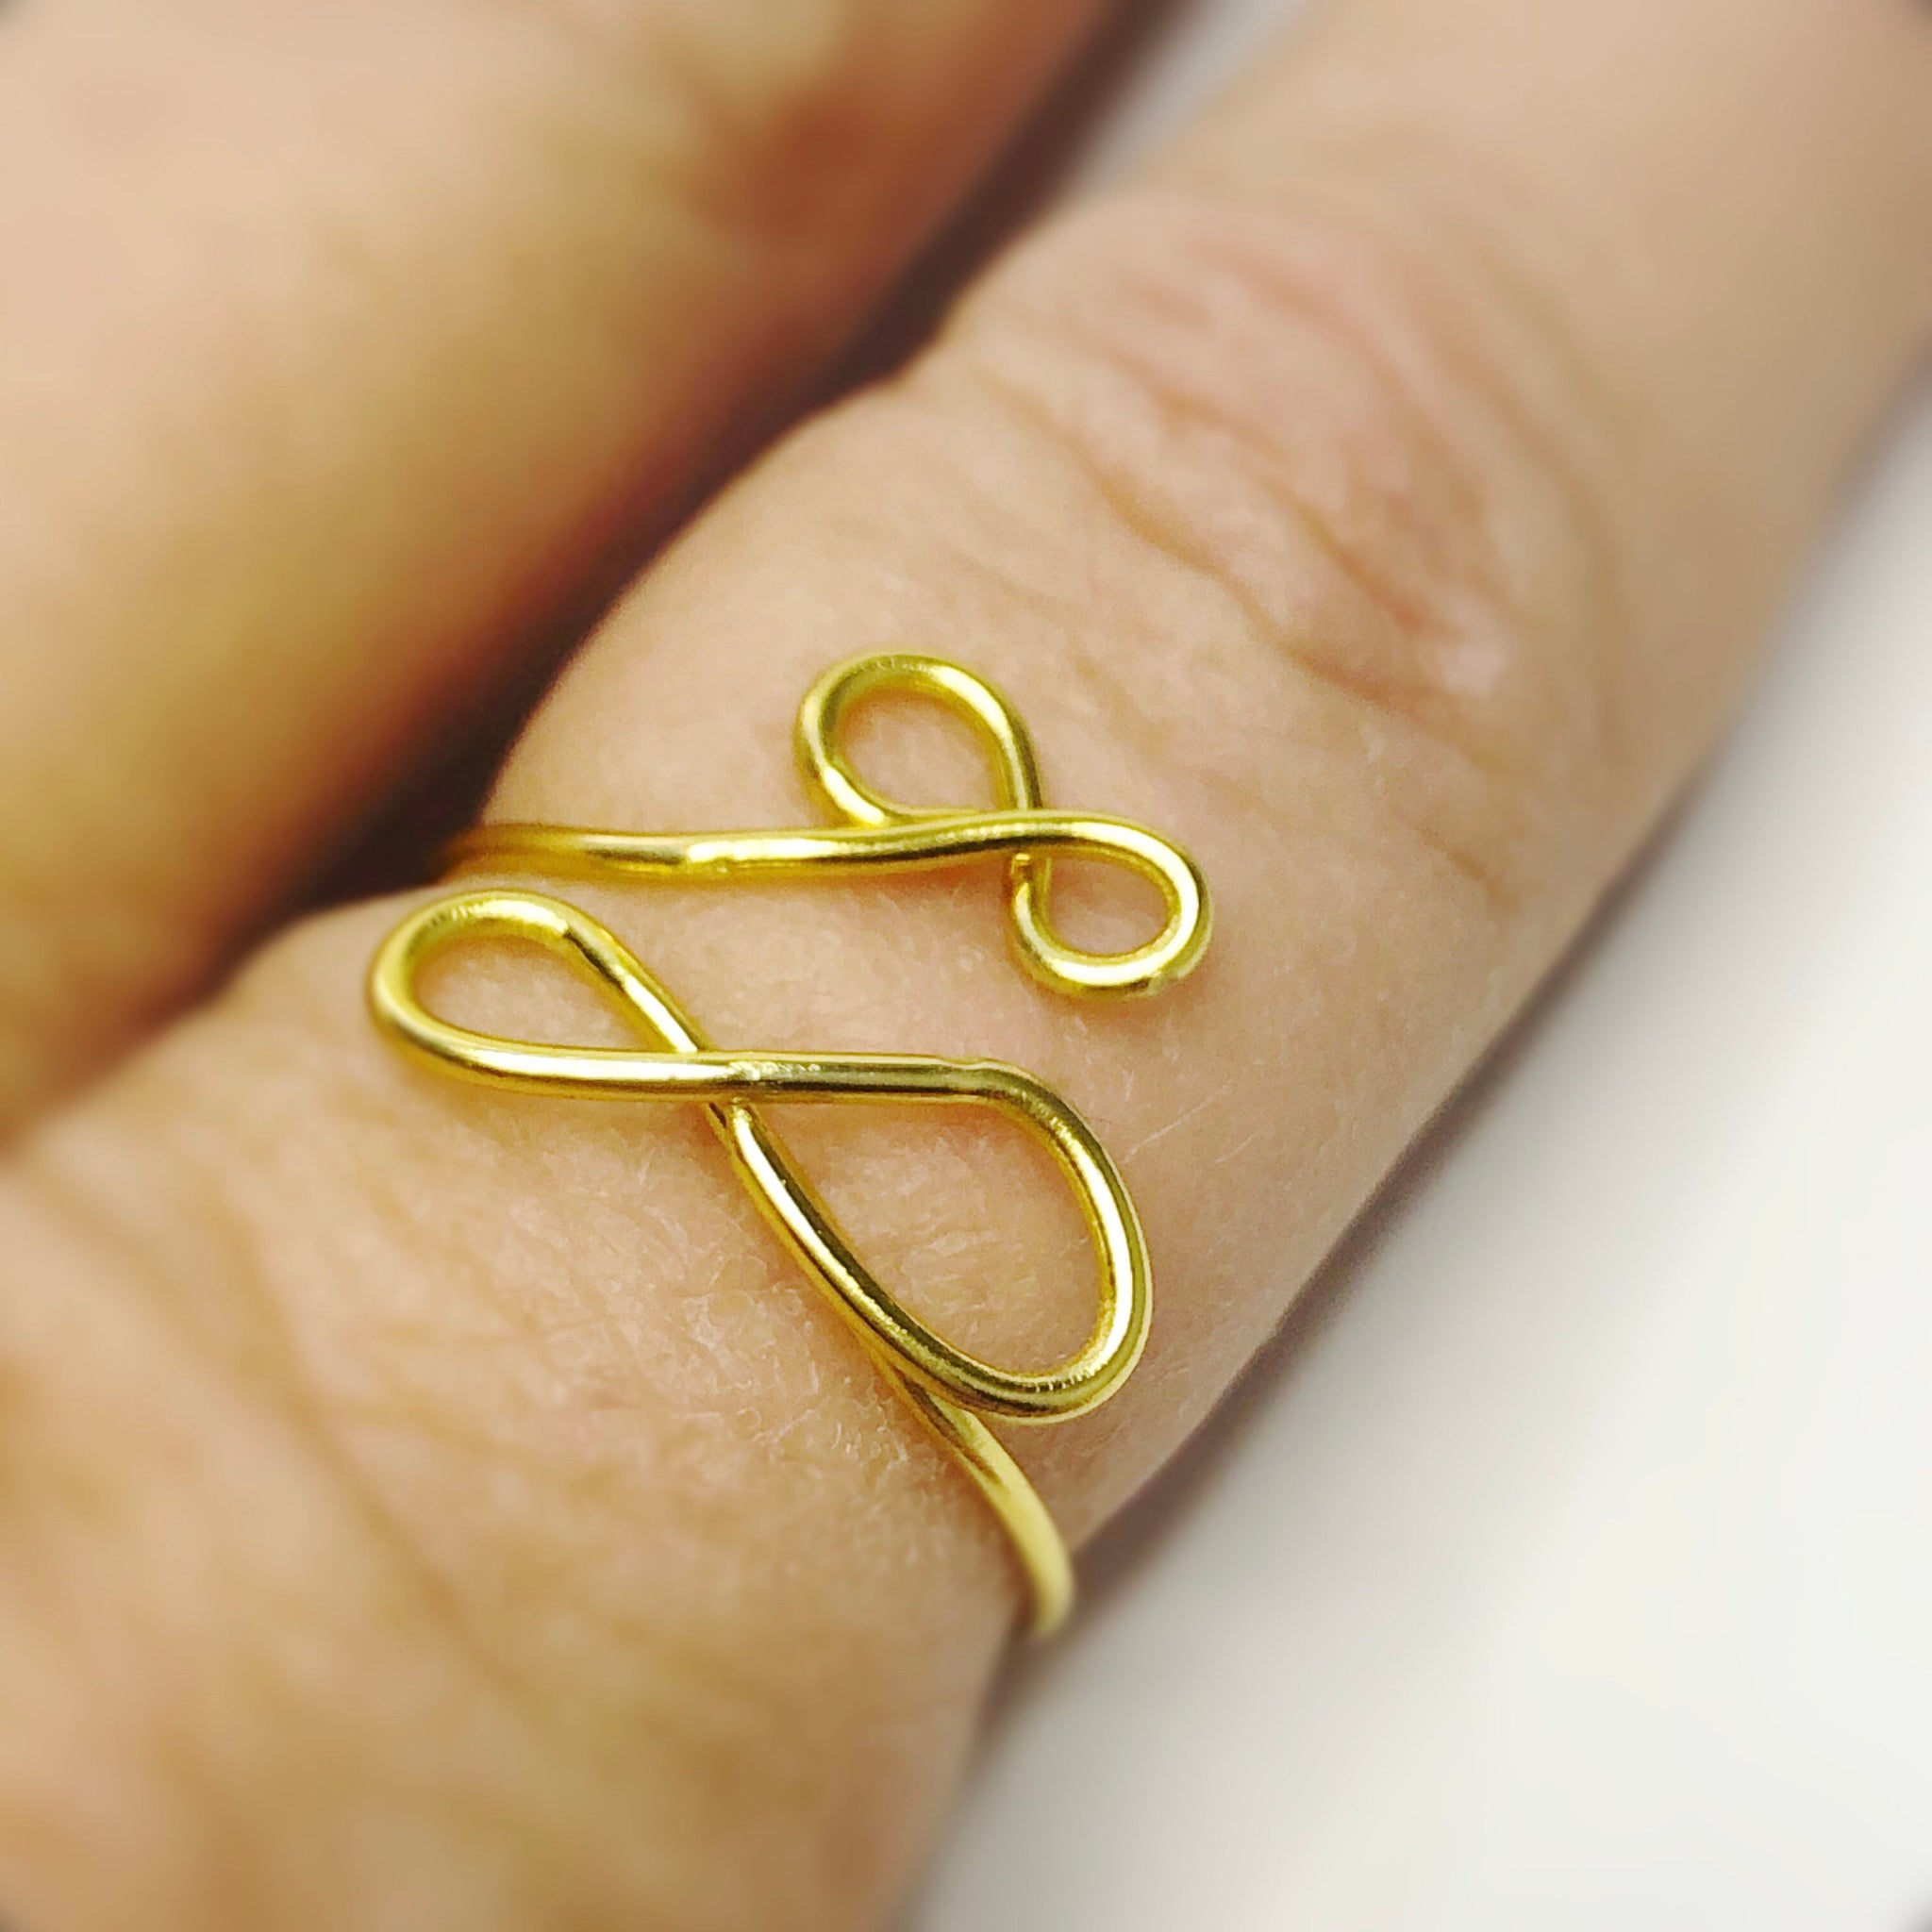 Medium Thick Rose Gold Infinity Knot Ring, Rose Gold Knot Ring, Rose  Stacking Ring, Knot Ring, Infinity Ring, Rose Gold Ring - Etsy | Fashion  rings, Gold rings fashion, Gold ring designs